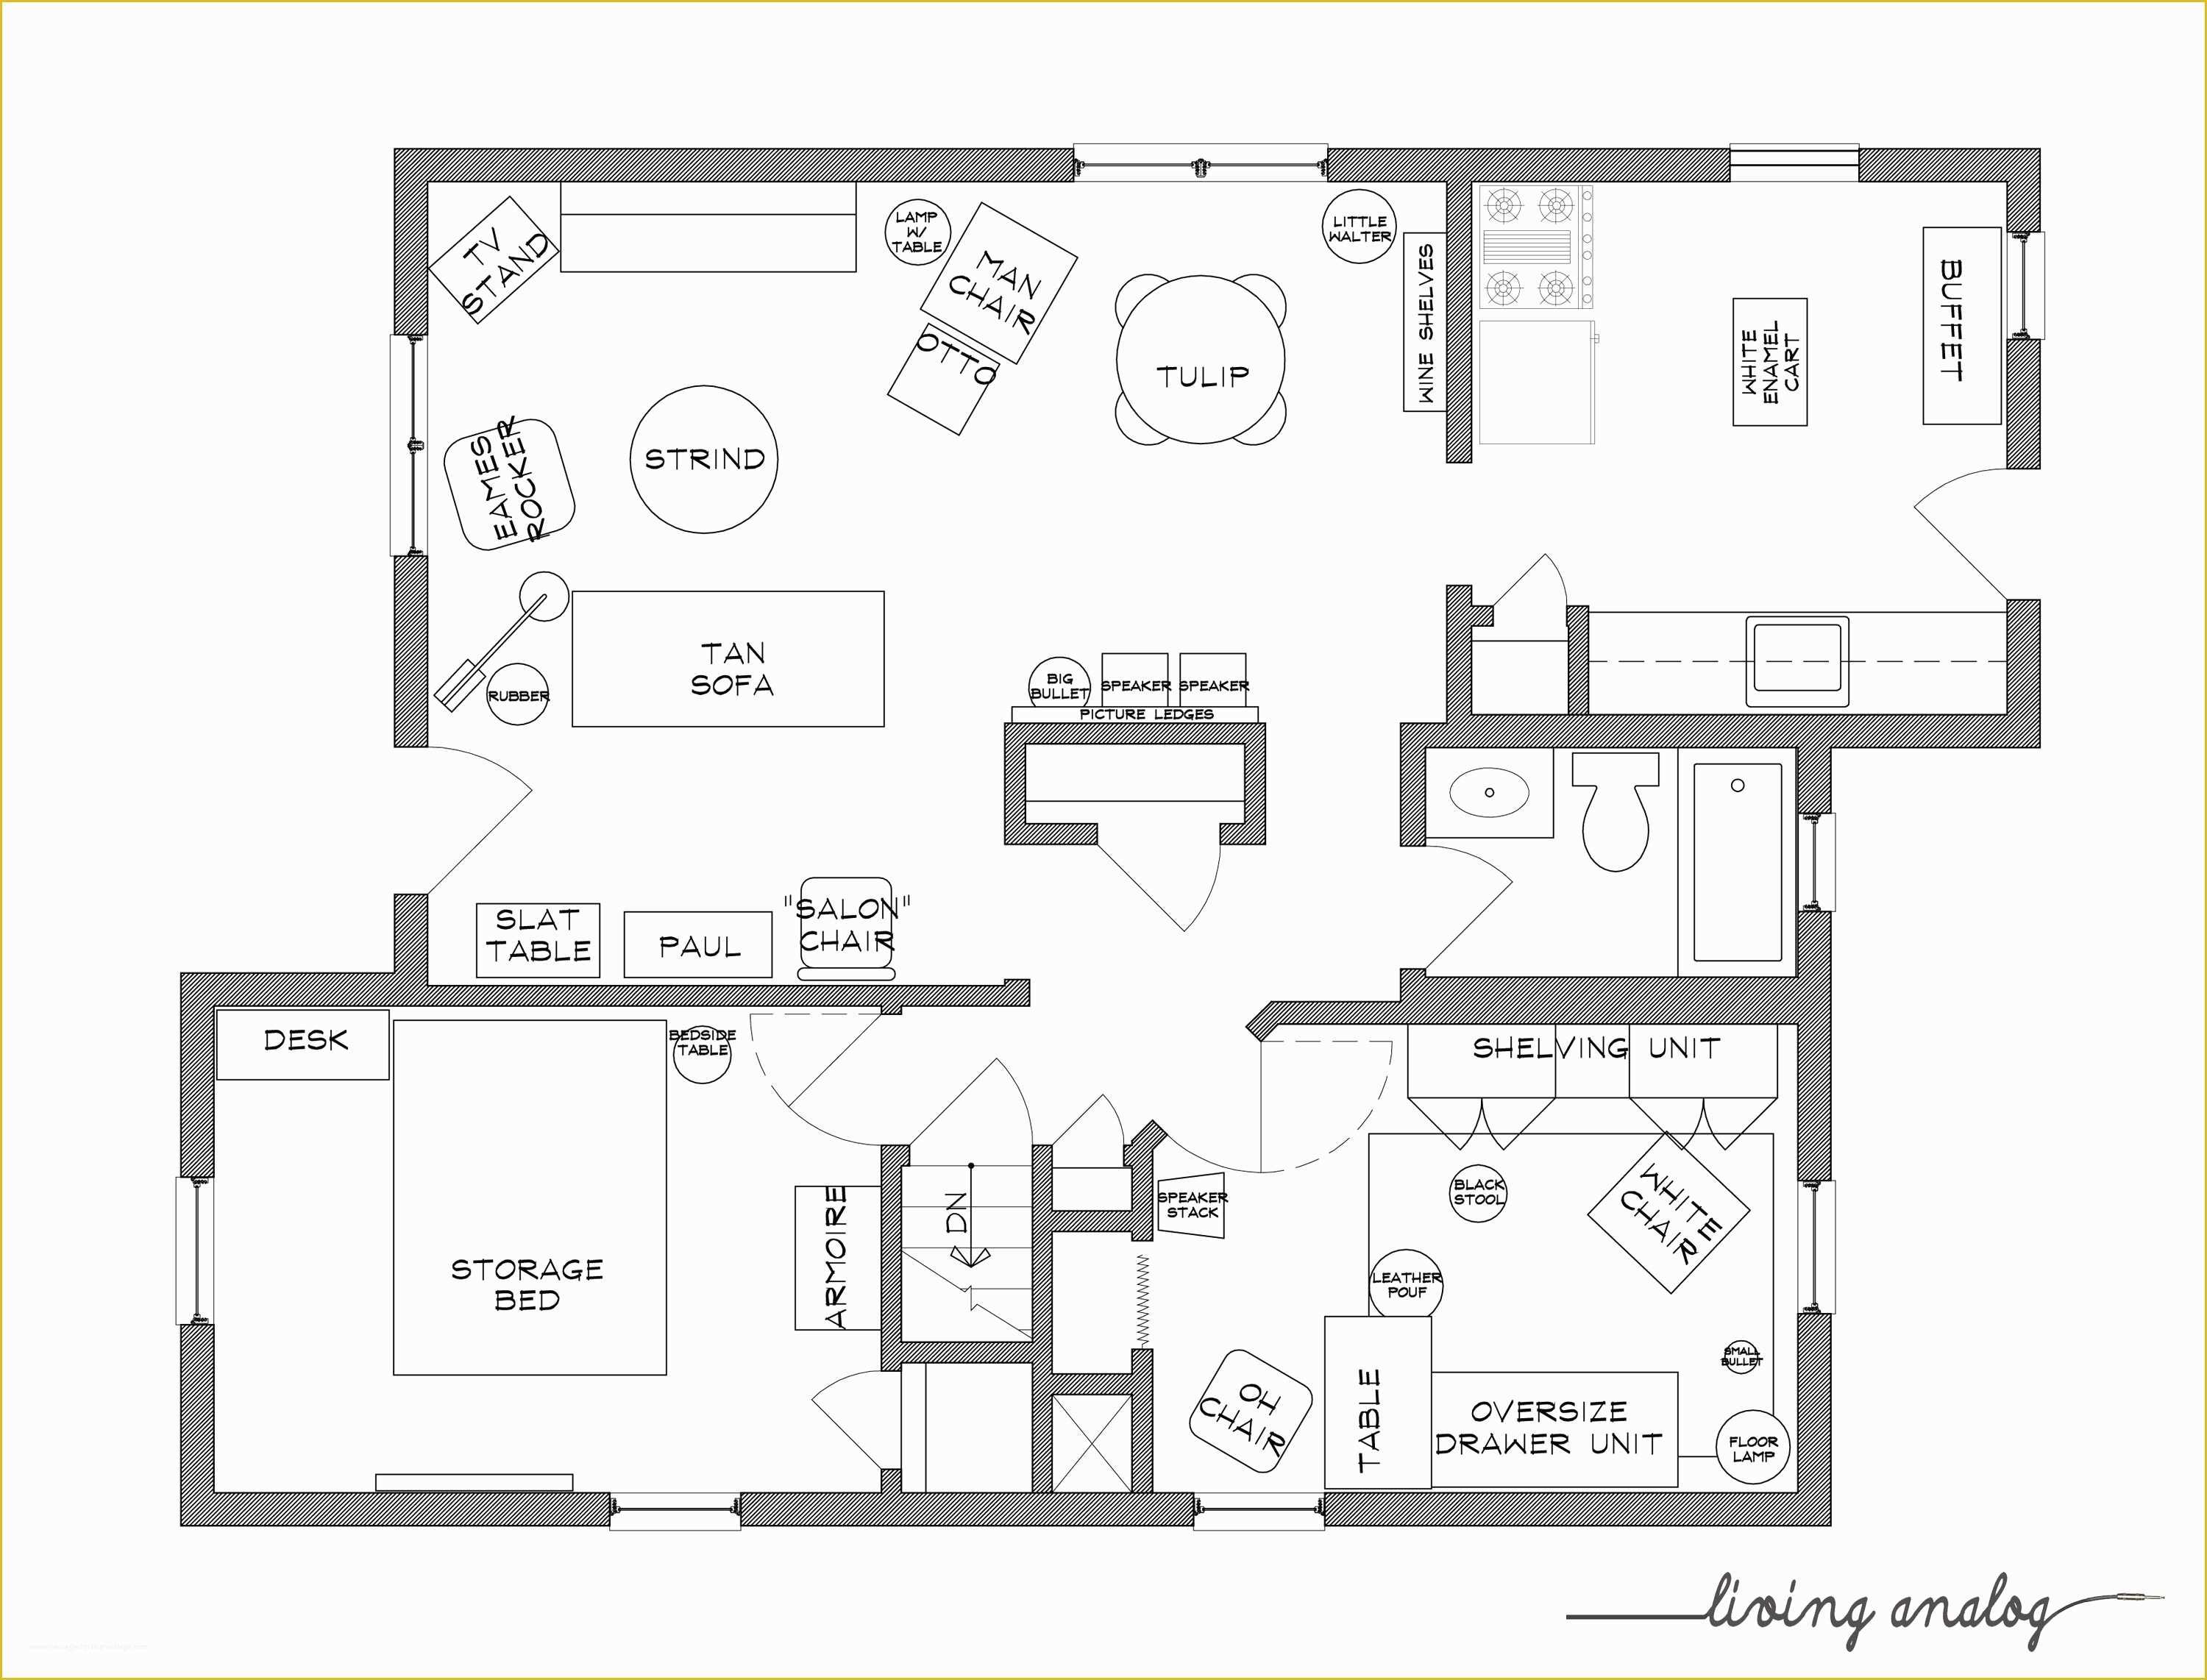 Furniture Placement Templates Free Of Free Furniture Templates for Floor Plans